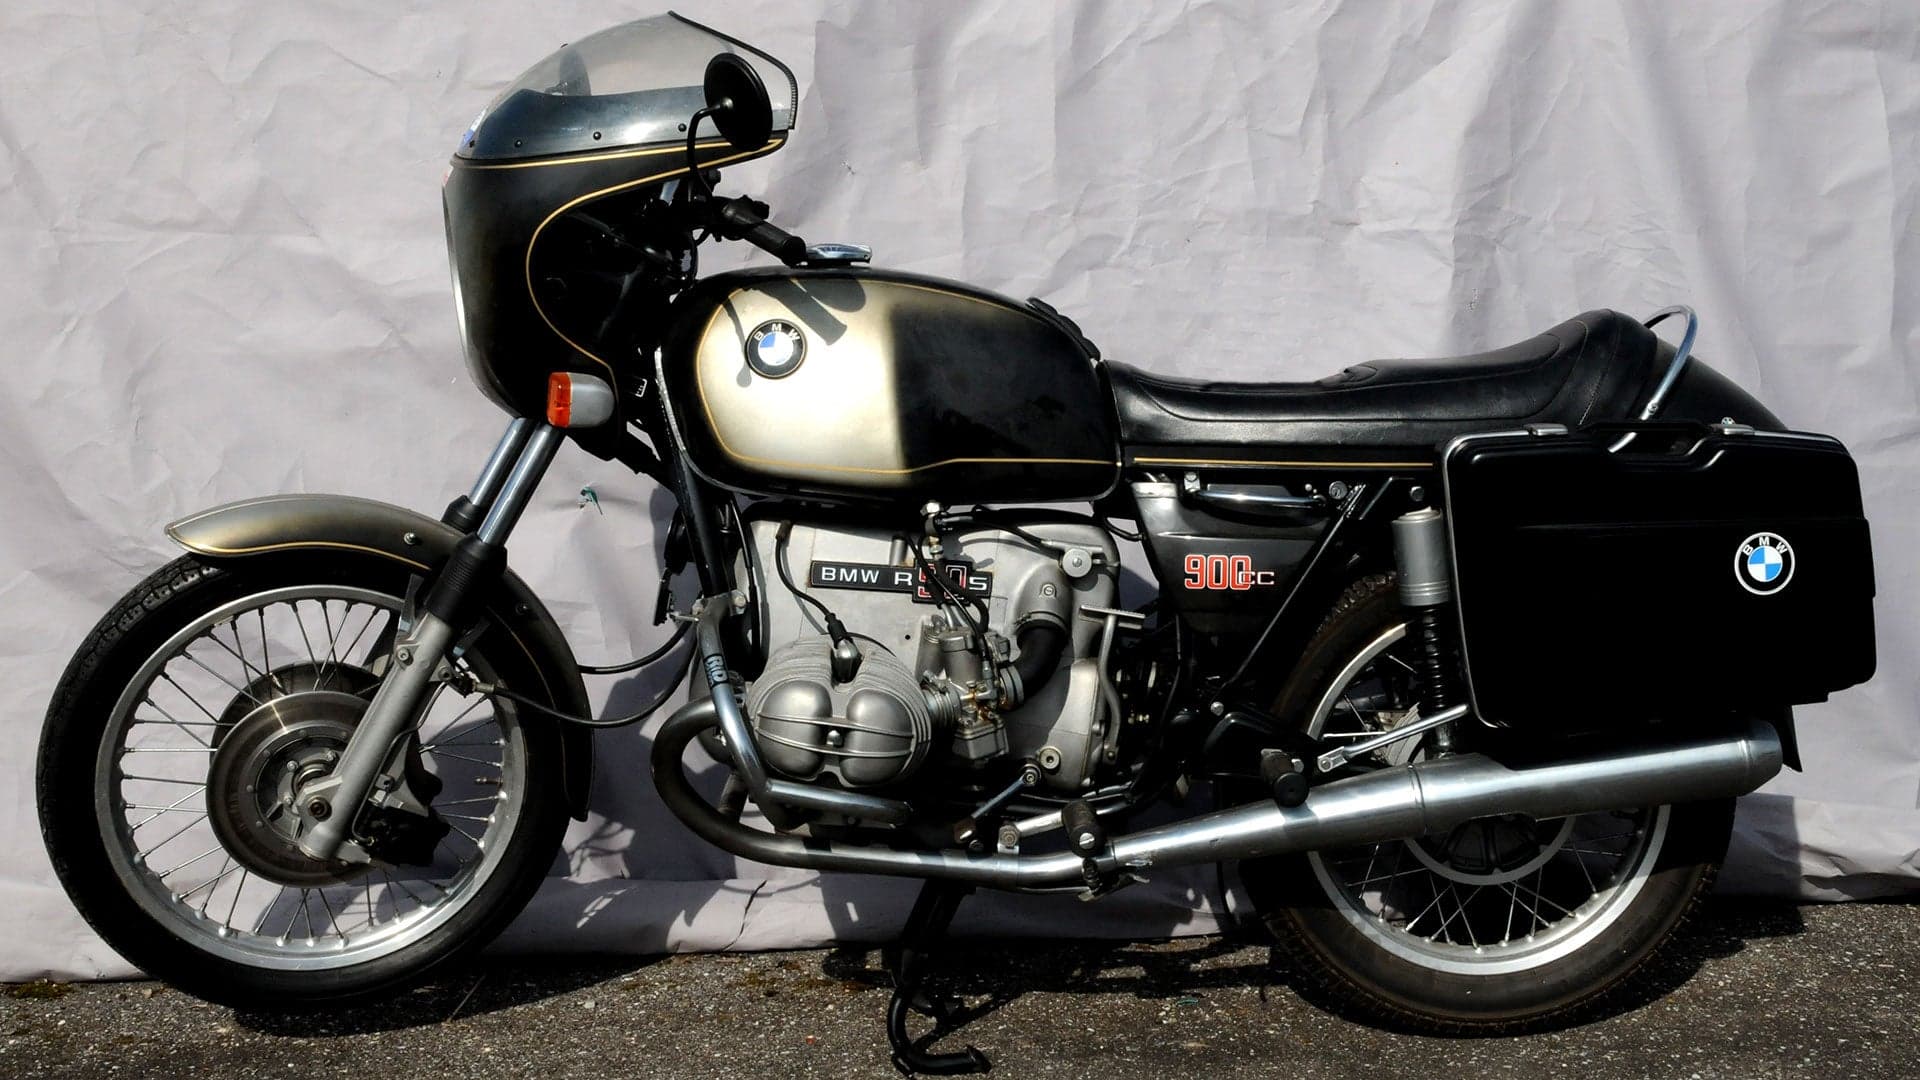 Seven Favorite Vintage BMW Motorcycles Up for Auction